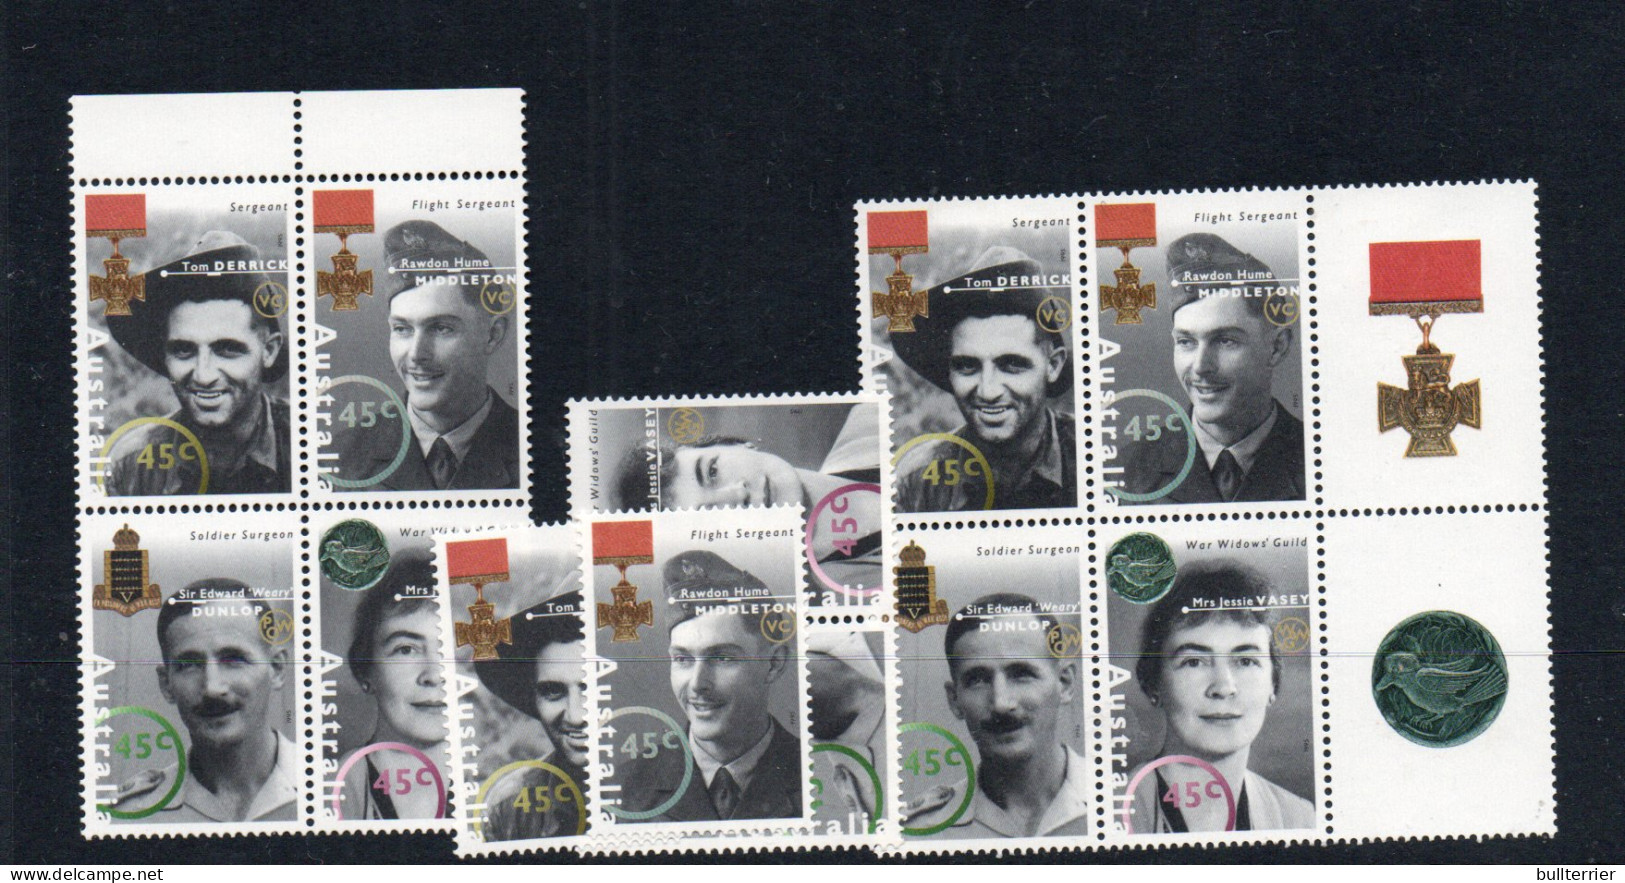 AUSTRALIA - 1995 - WW2 HEROES SET OF 4 X 3 MINT NEVER HINGED  - Mint Stamps